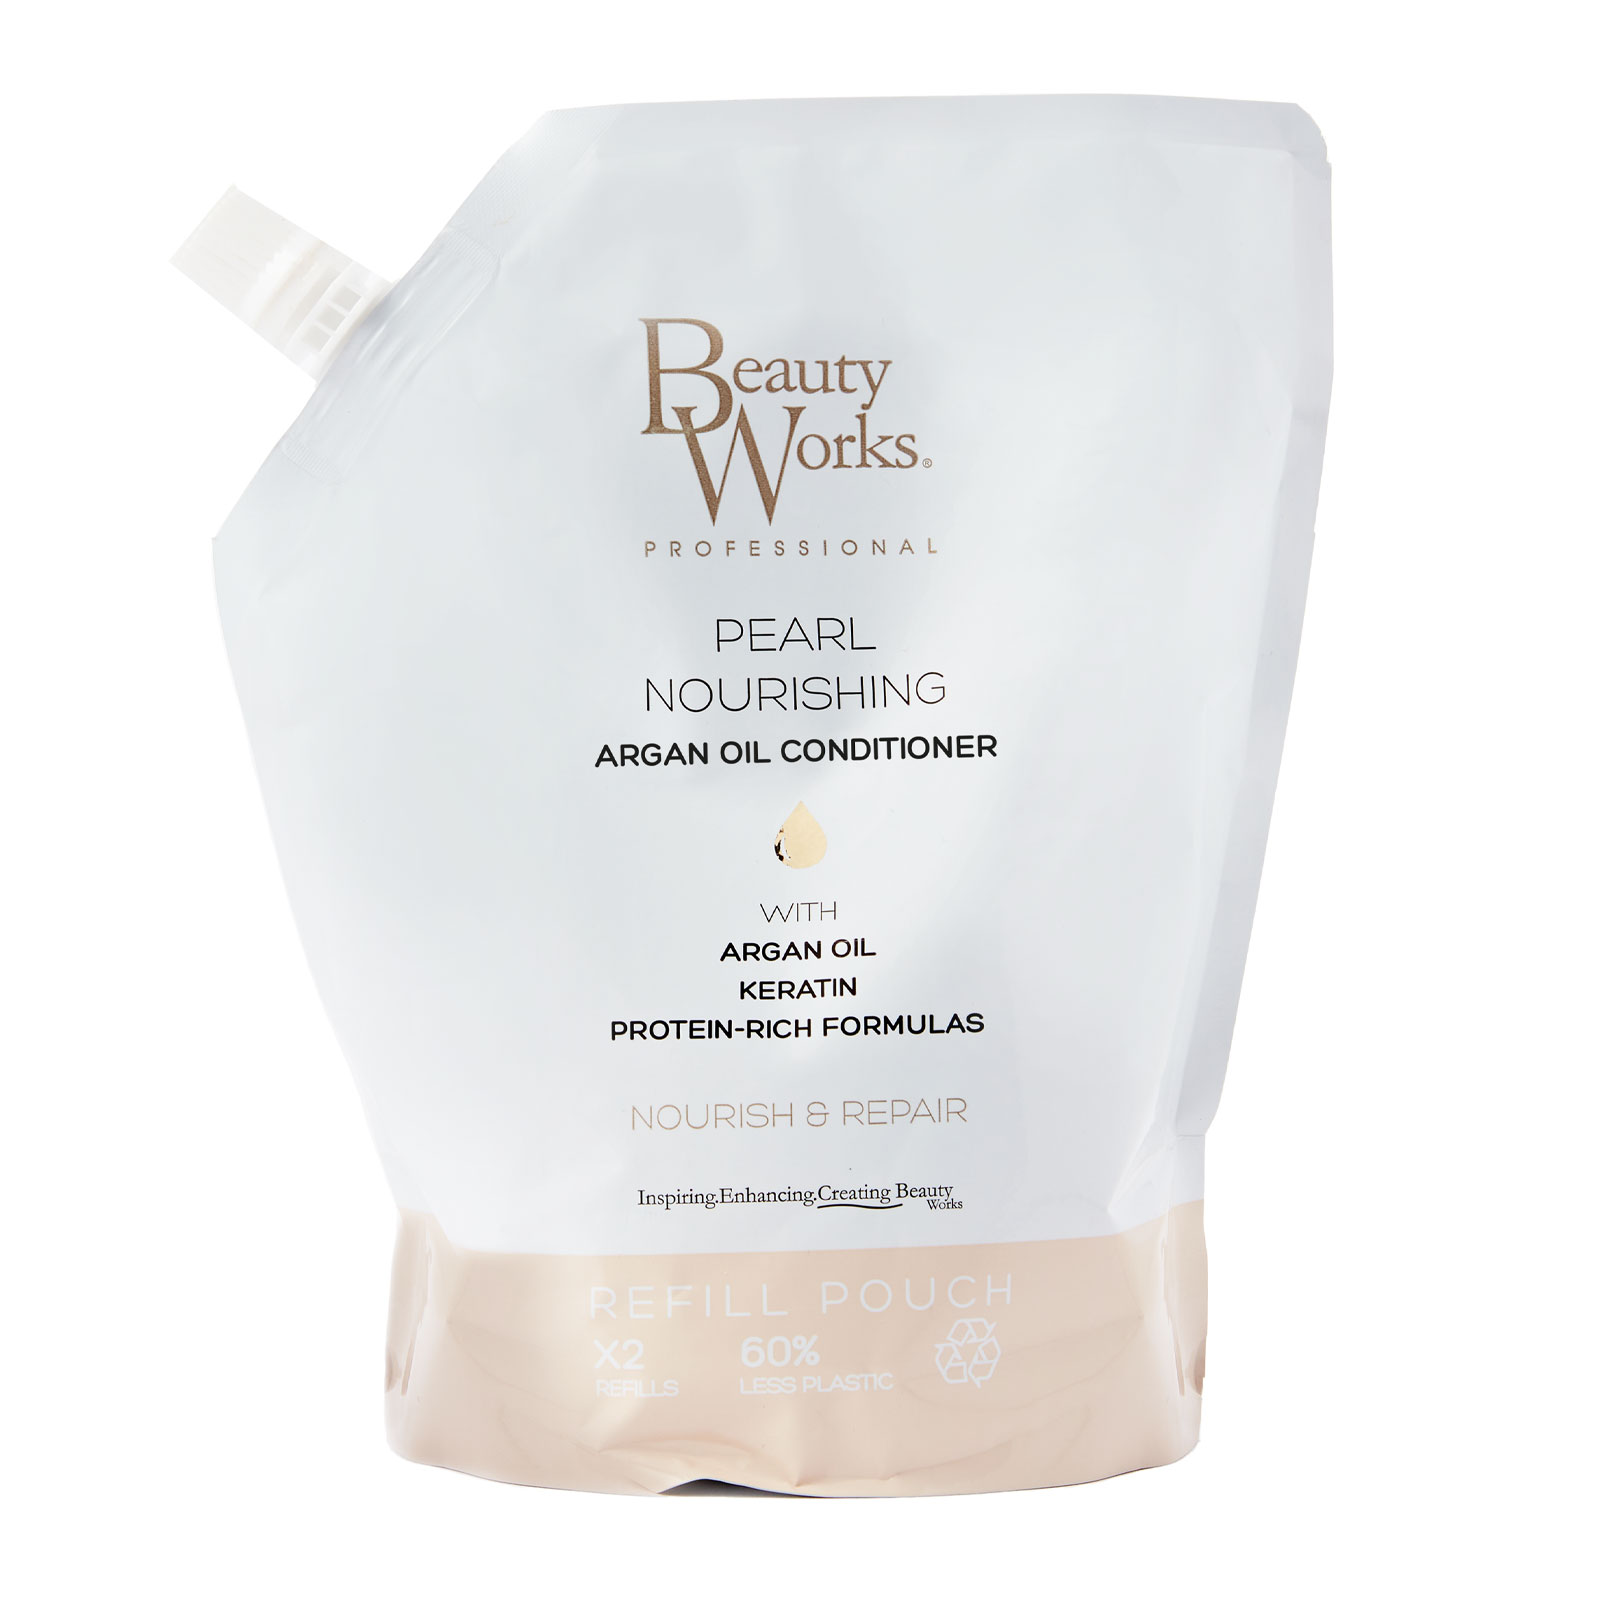 Beauty Works Pearl Nourishing Conditioner Refill Pouch 500Ml